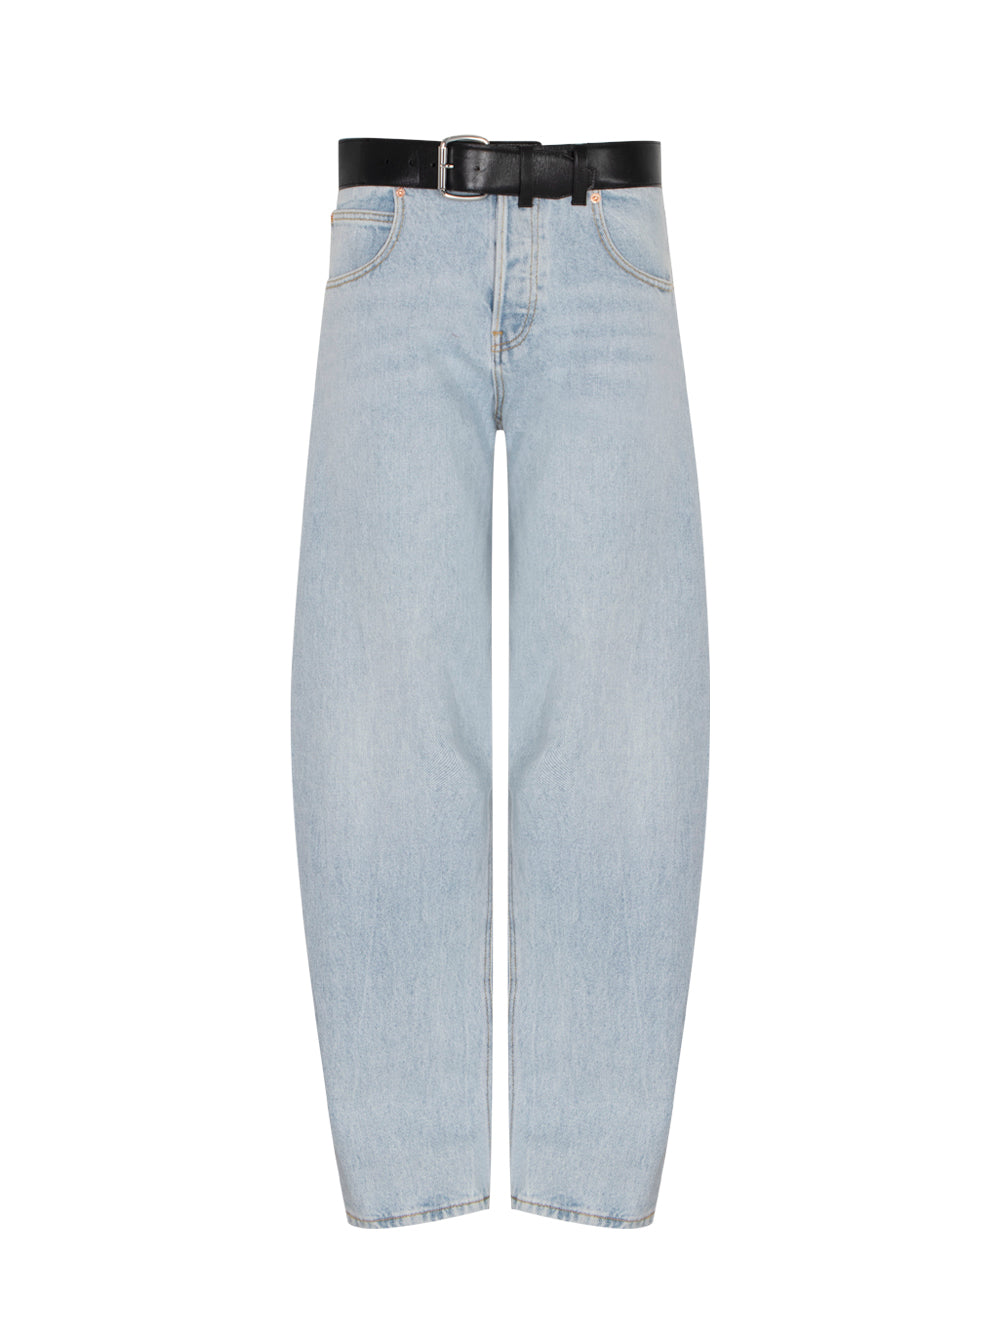 Leather Belted Denim Jeans (Bleach)